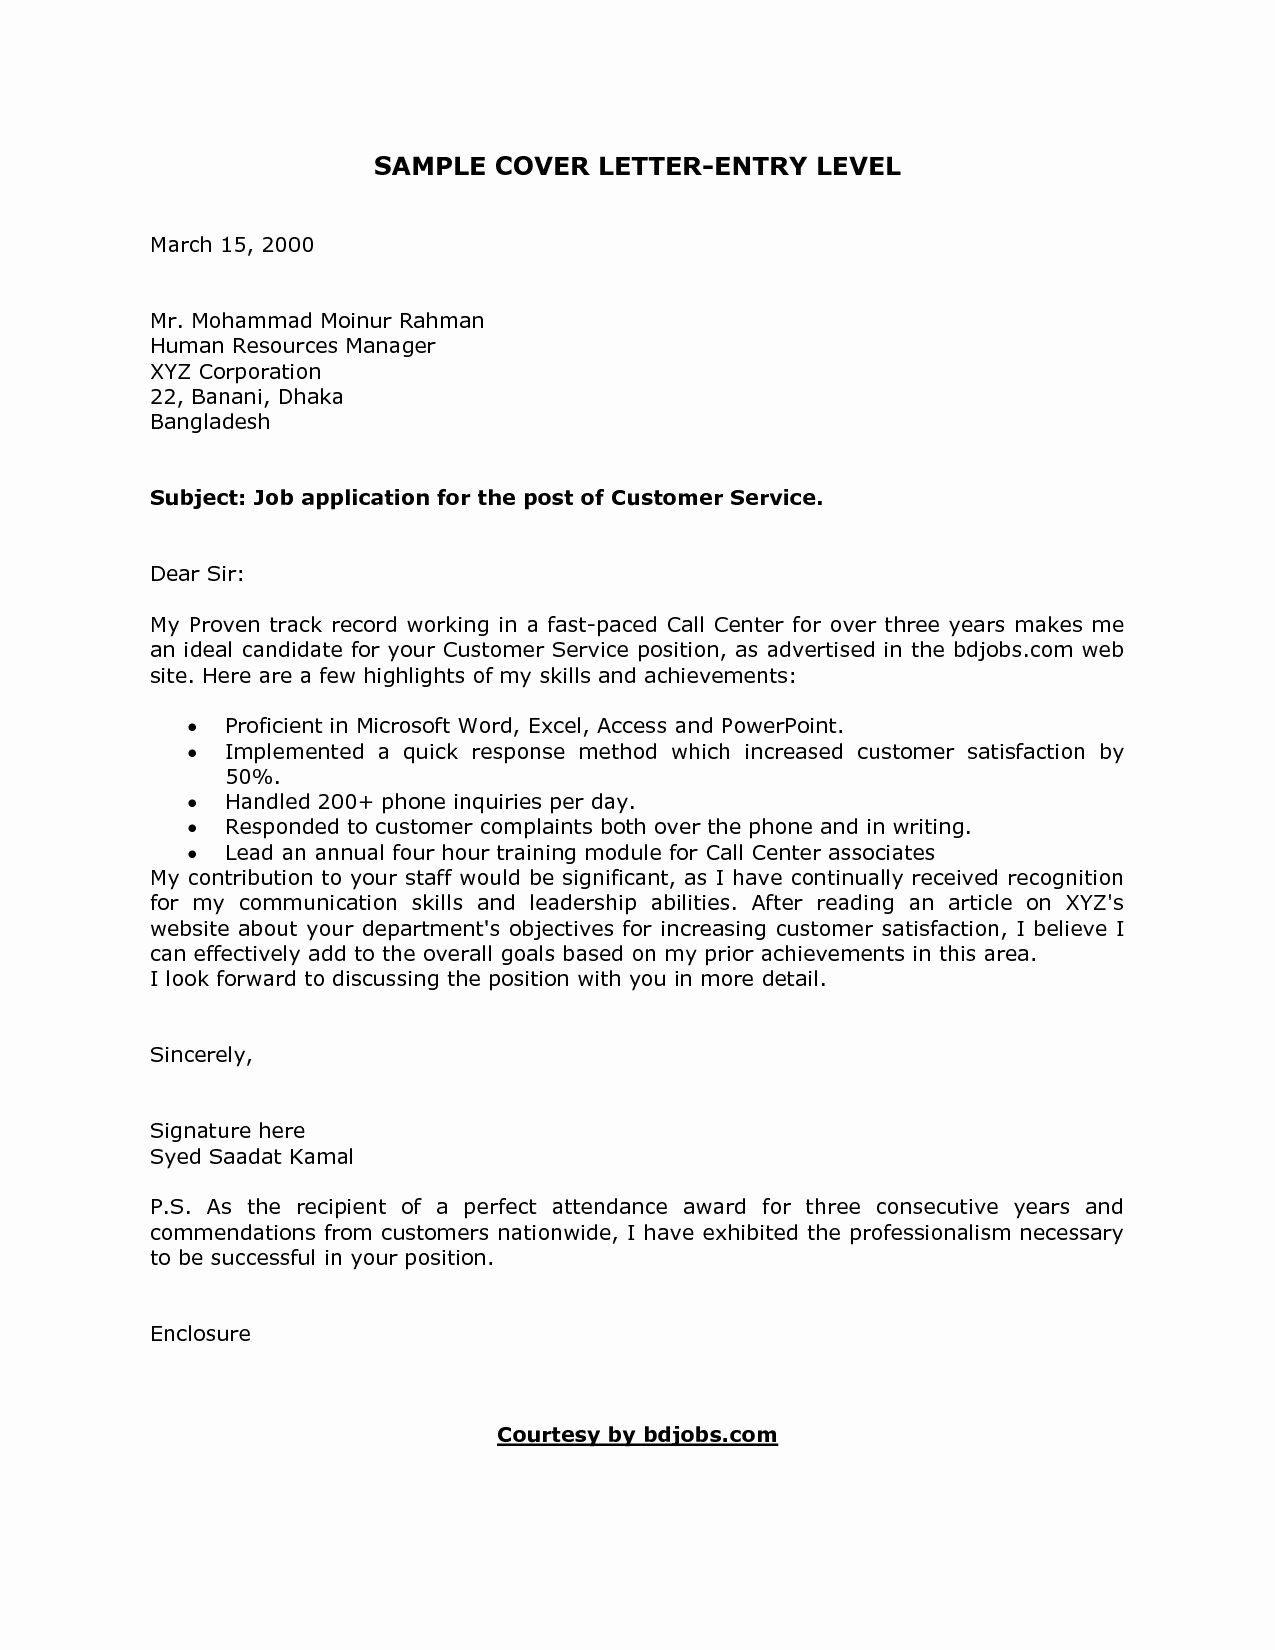 Entry Level Cover Letters Samples Awesome Cover Letter format Creating An Executive Cover Letter